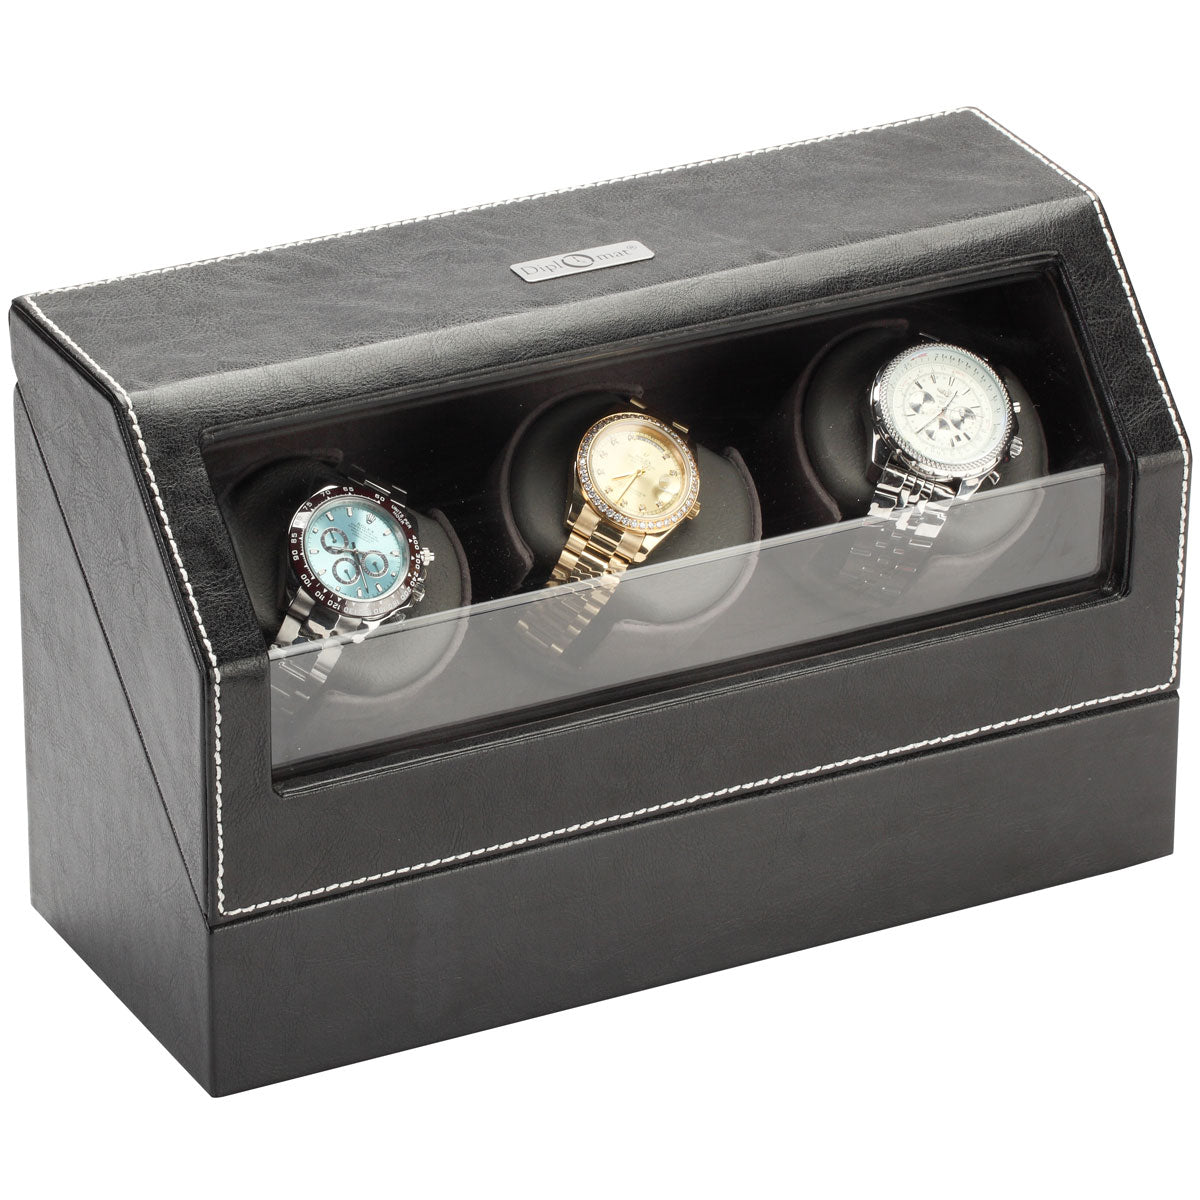 Diplomat "Victoria" 3-Watch Winder in Onyx & Charcoal